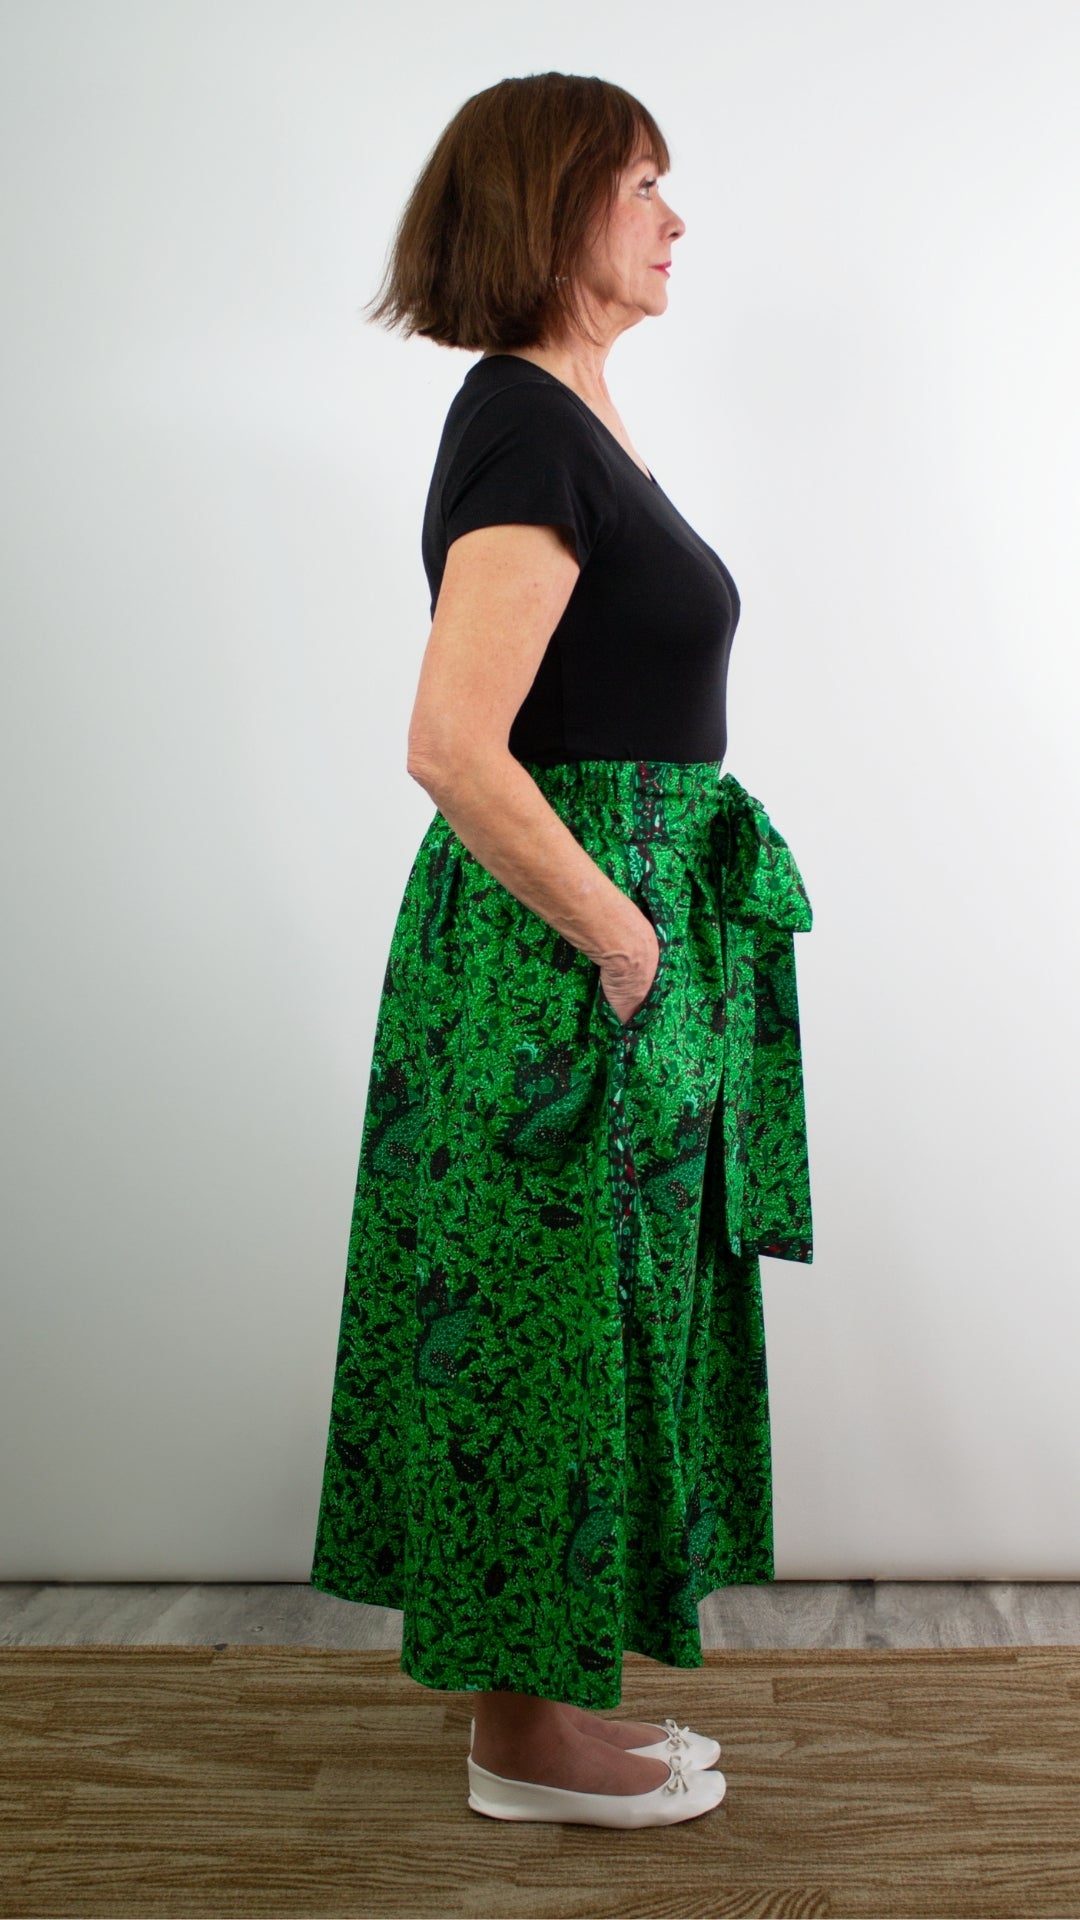 Model showcasing the side look of a botanical green print skirt with hands in pockets.